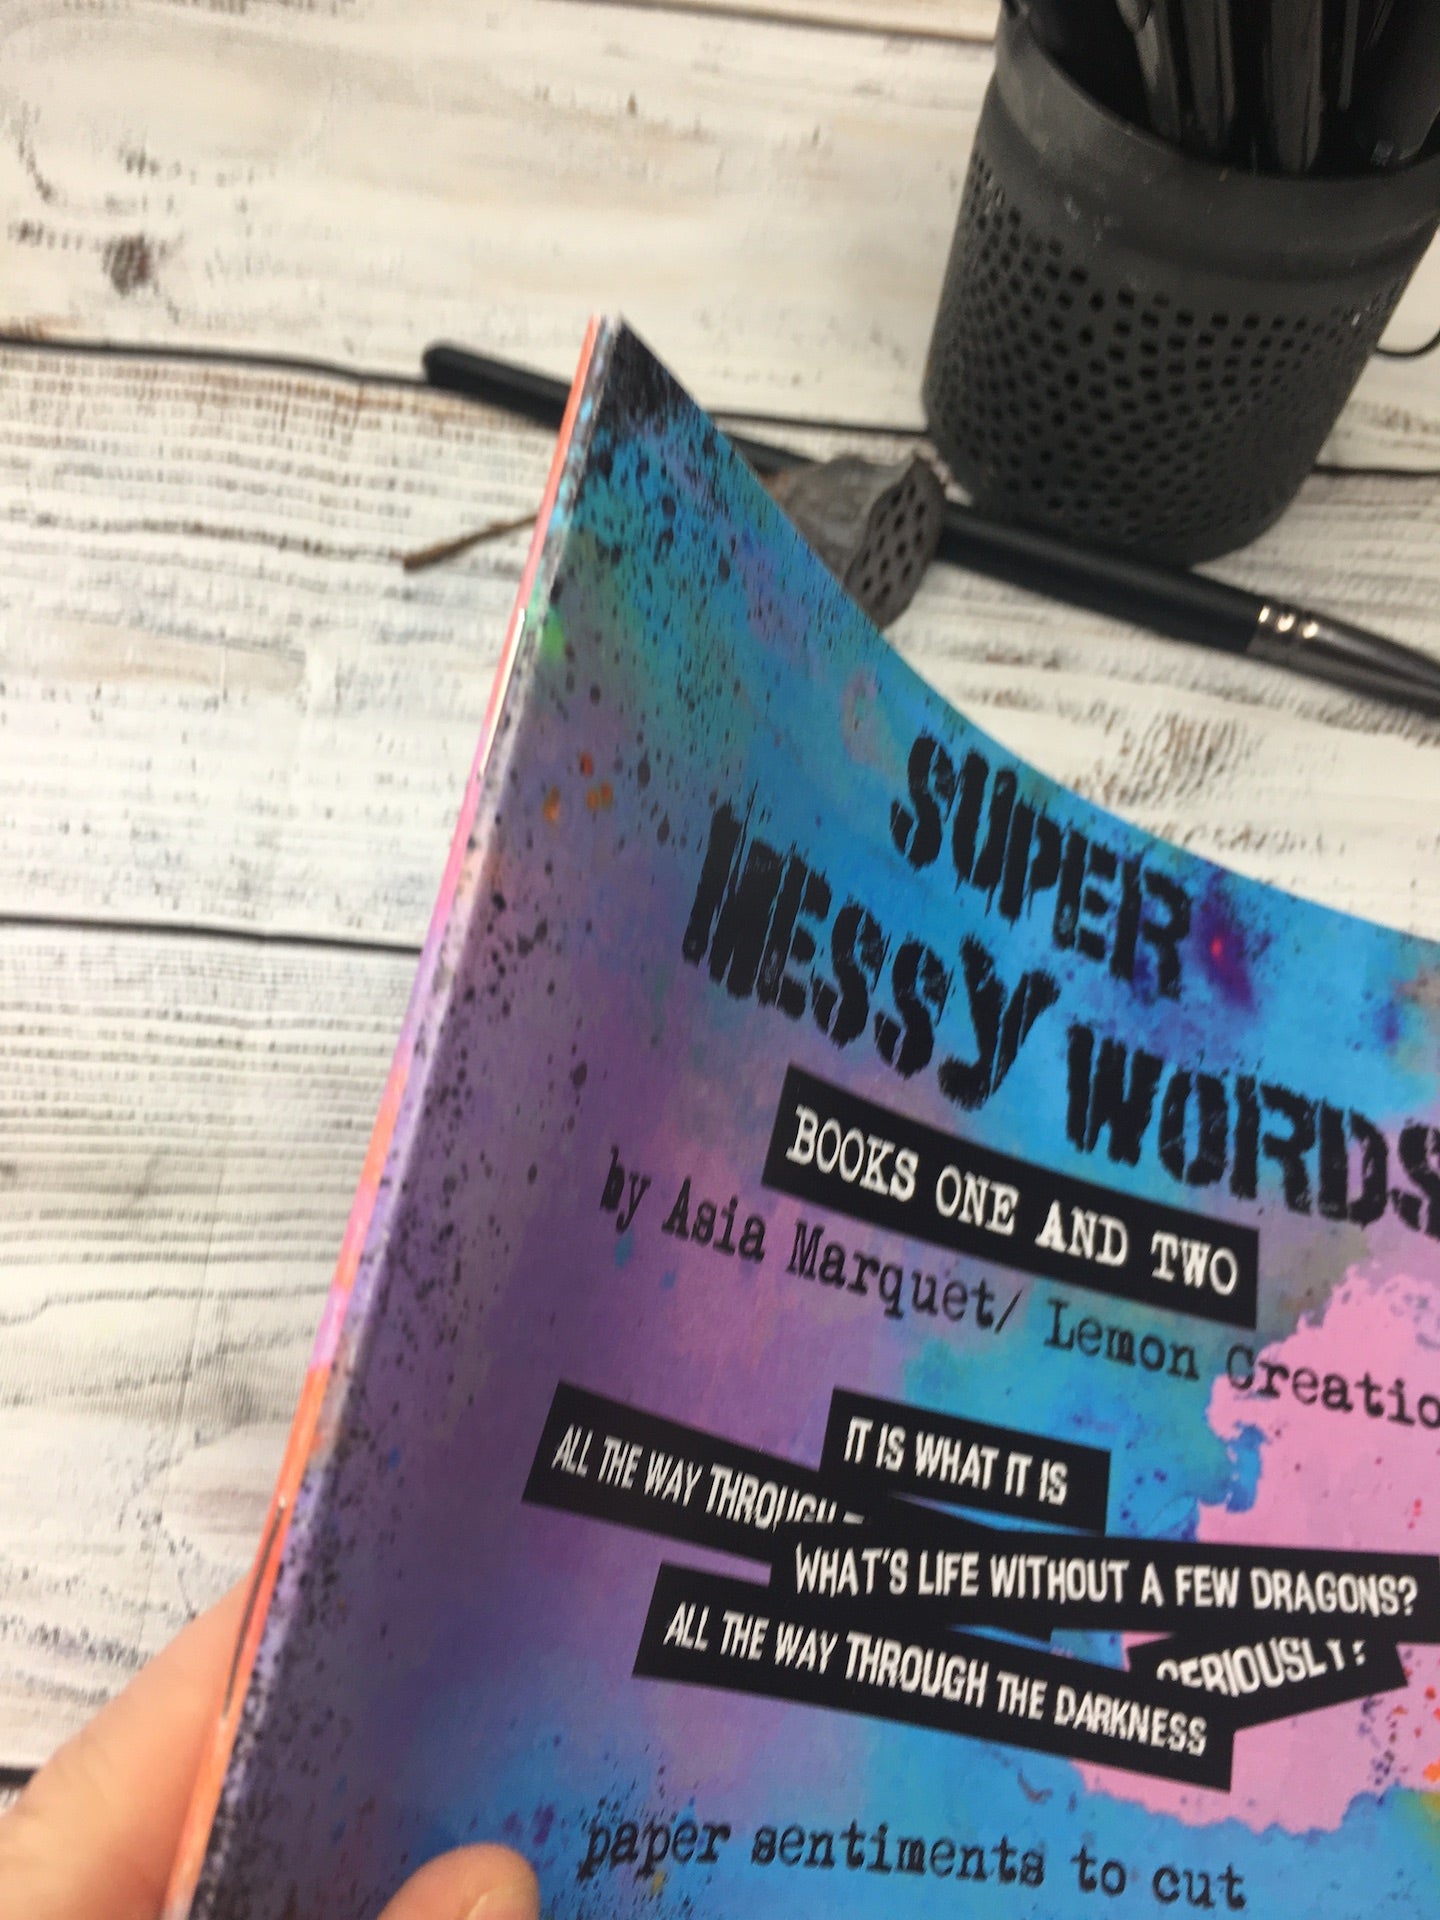 Super Messy Words -book 1 & 2